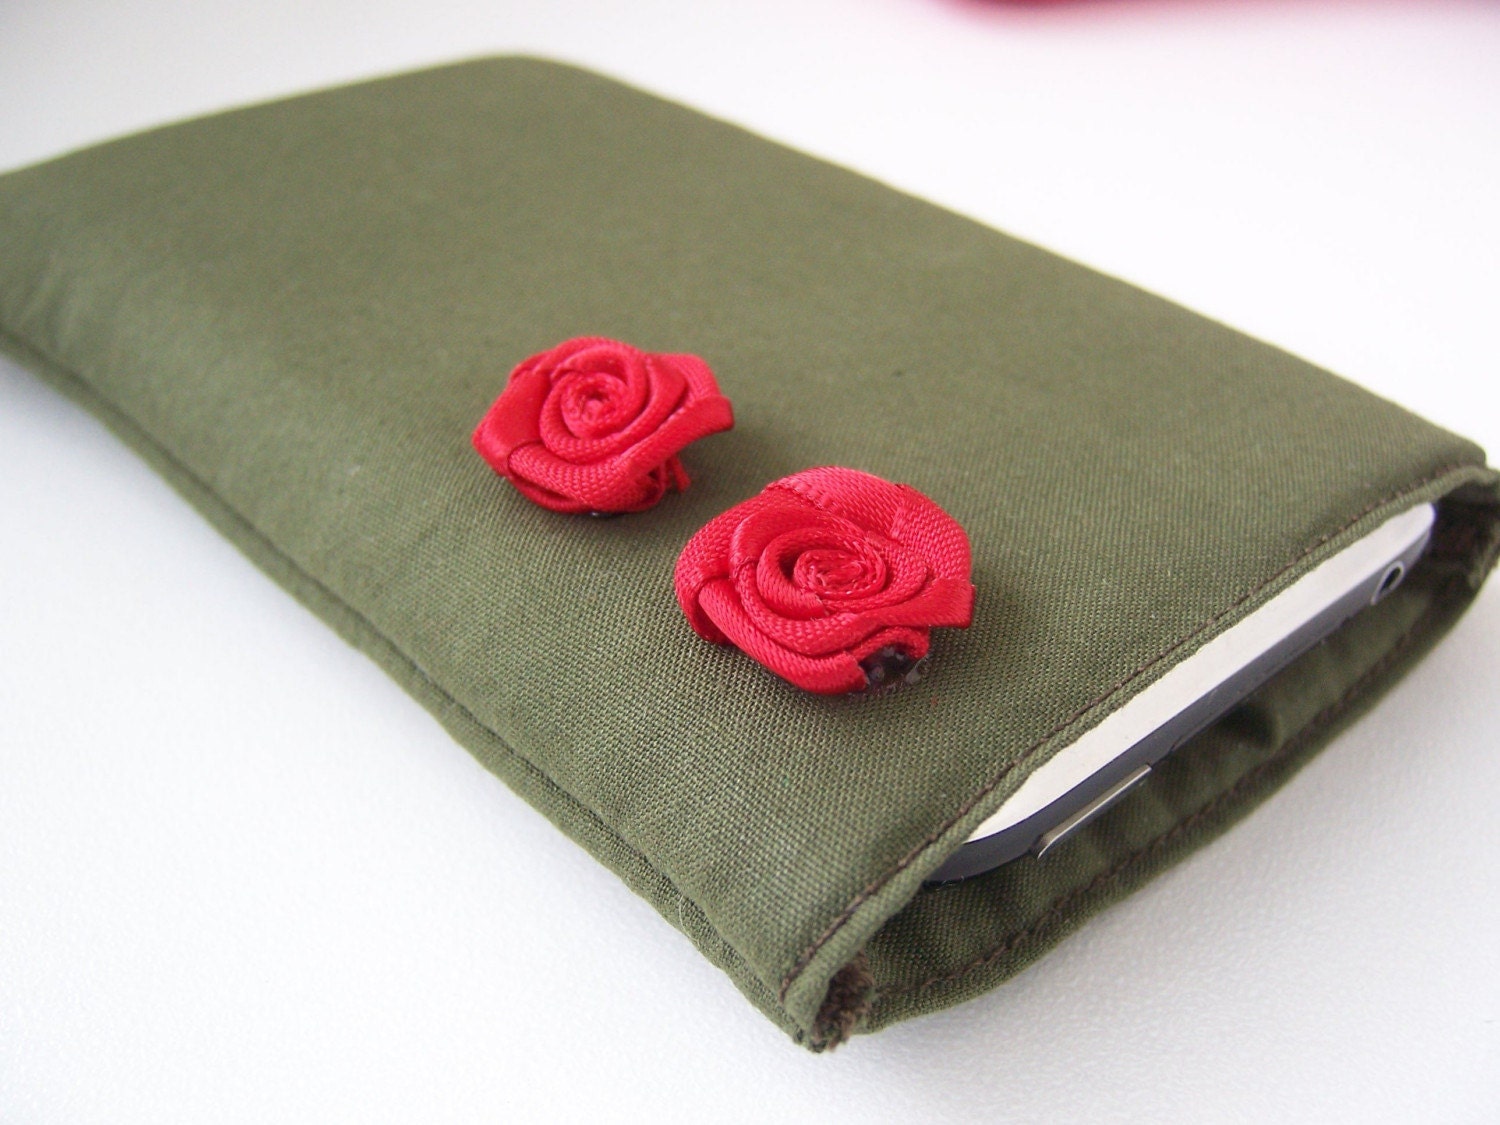 hello roses - iphone/itouch sleeve